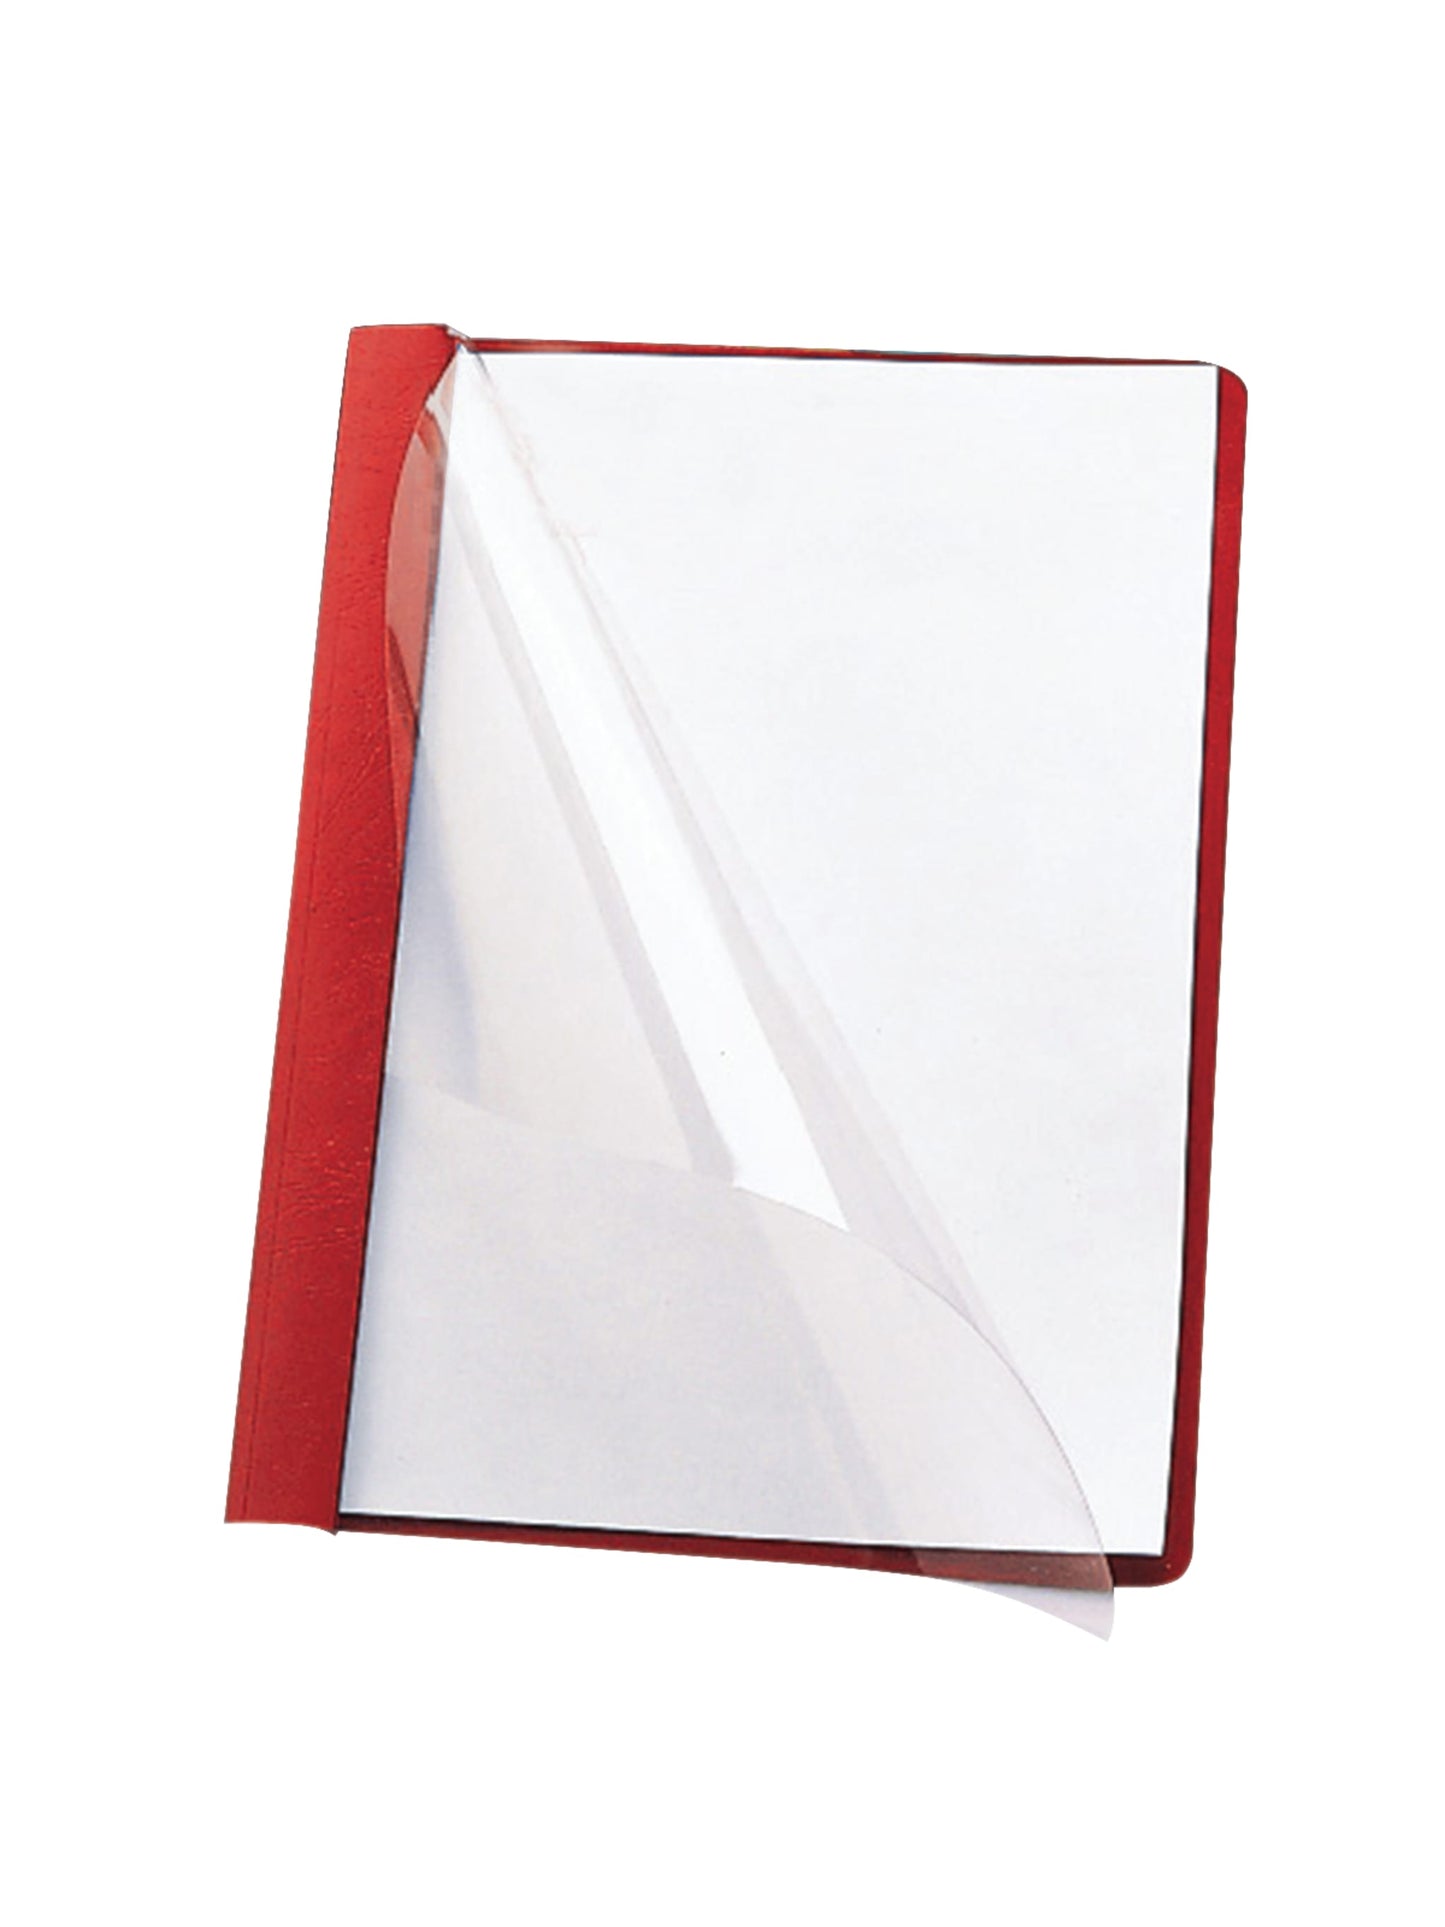 Heavyweight Paper Report Covers with Clear Front, Red Color, Letter Size, Set of 0, 30086486874619